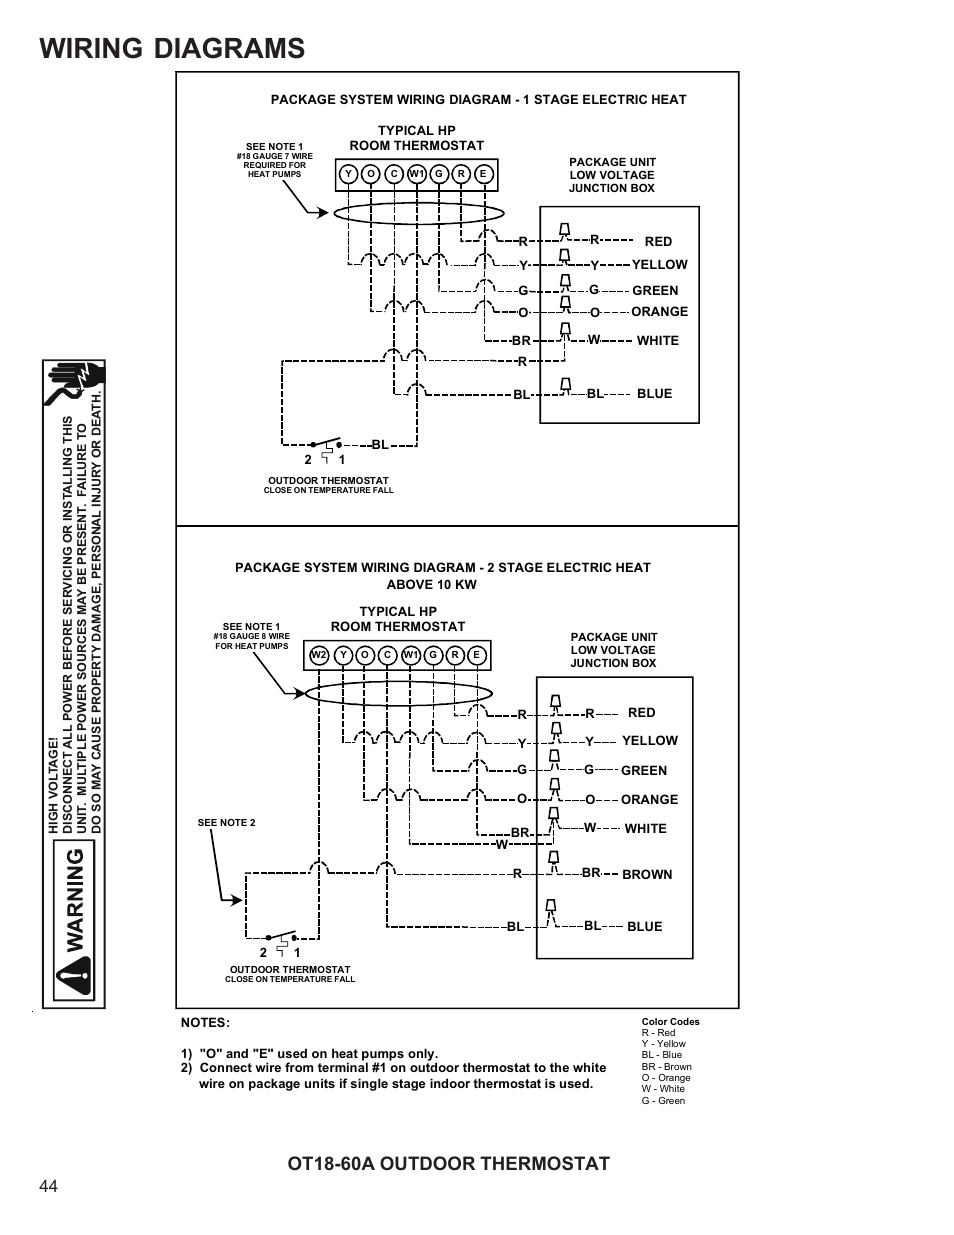 Wiring diagrams, Ot18-60a outdoor thermostat | Goodman Mfg R-410A User